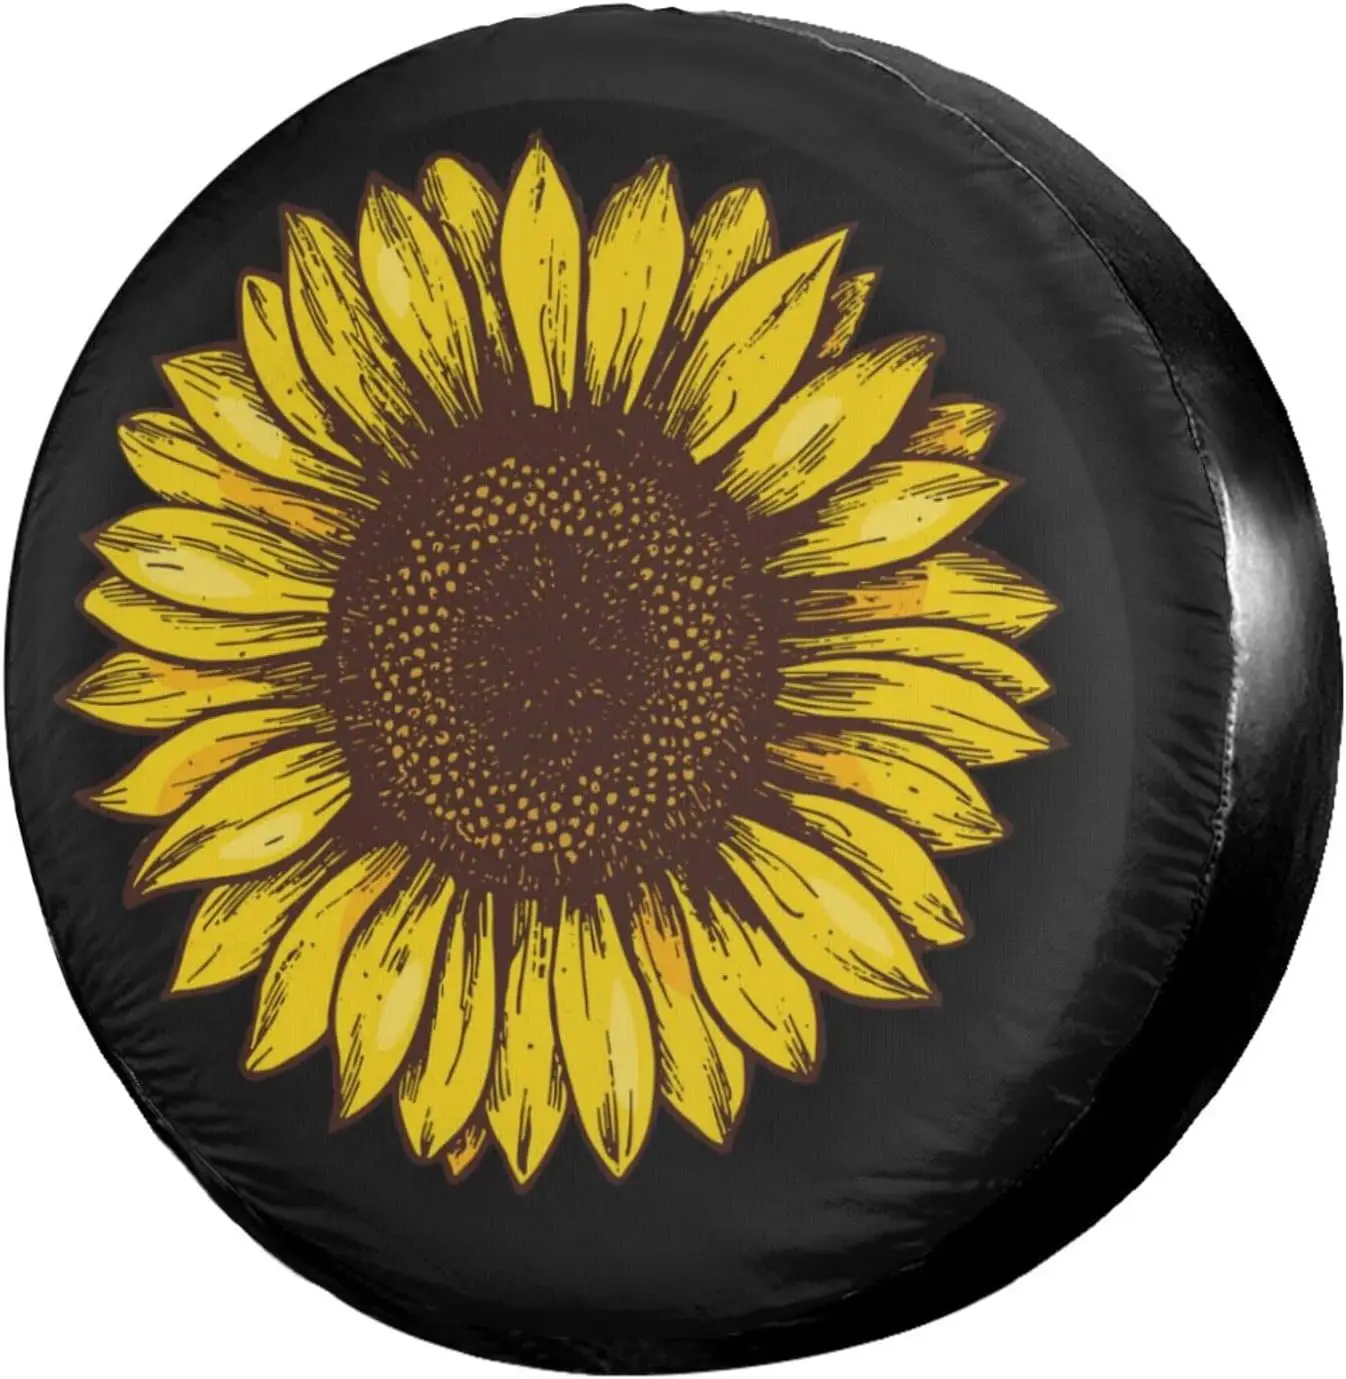 

Retro Sunflower Spare Tire Cover Dust-Proof Wheel Tire Cover Fit Trailer RV SUV and Many Vehicle Truck Camper Travel Trailer